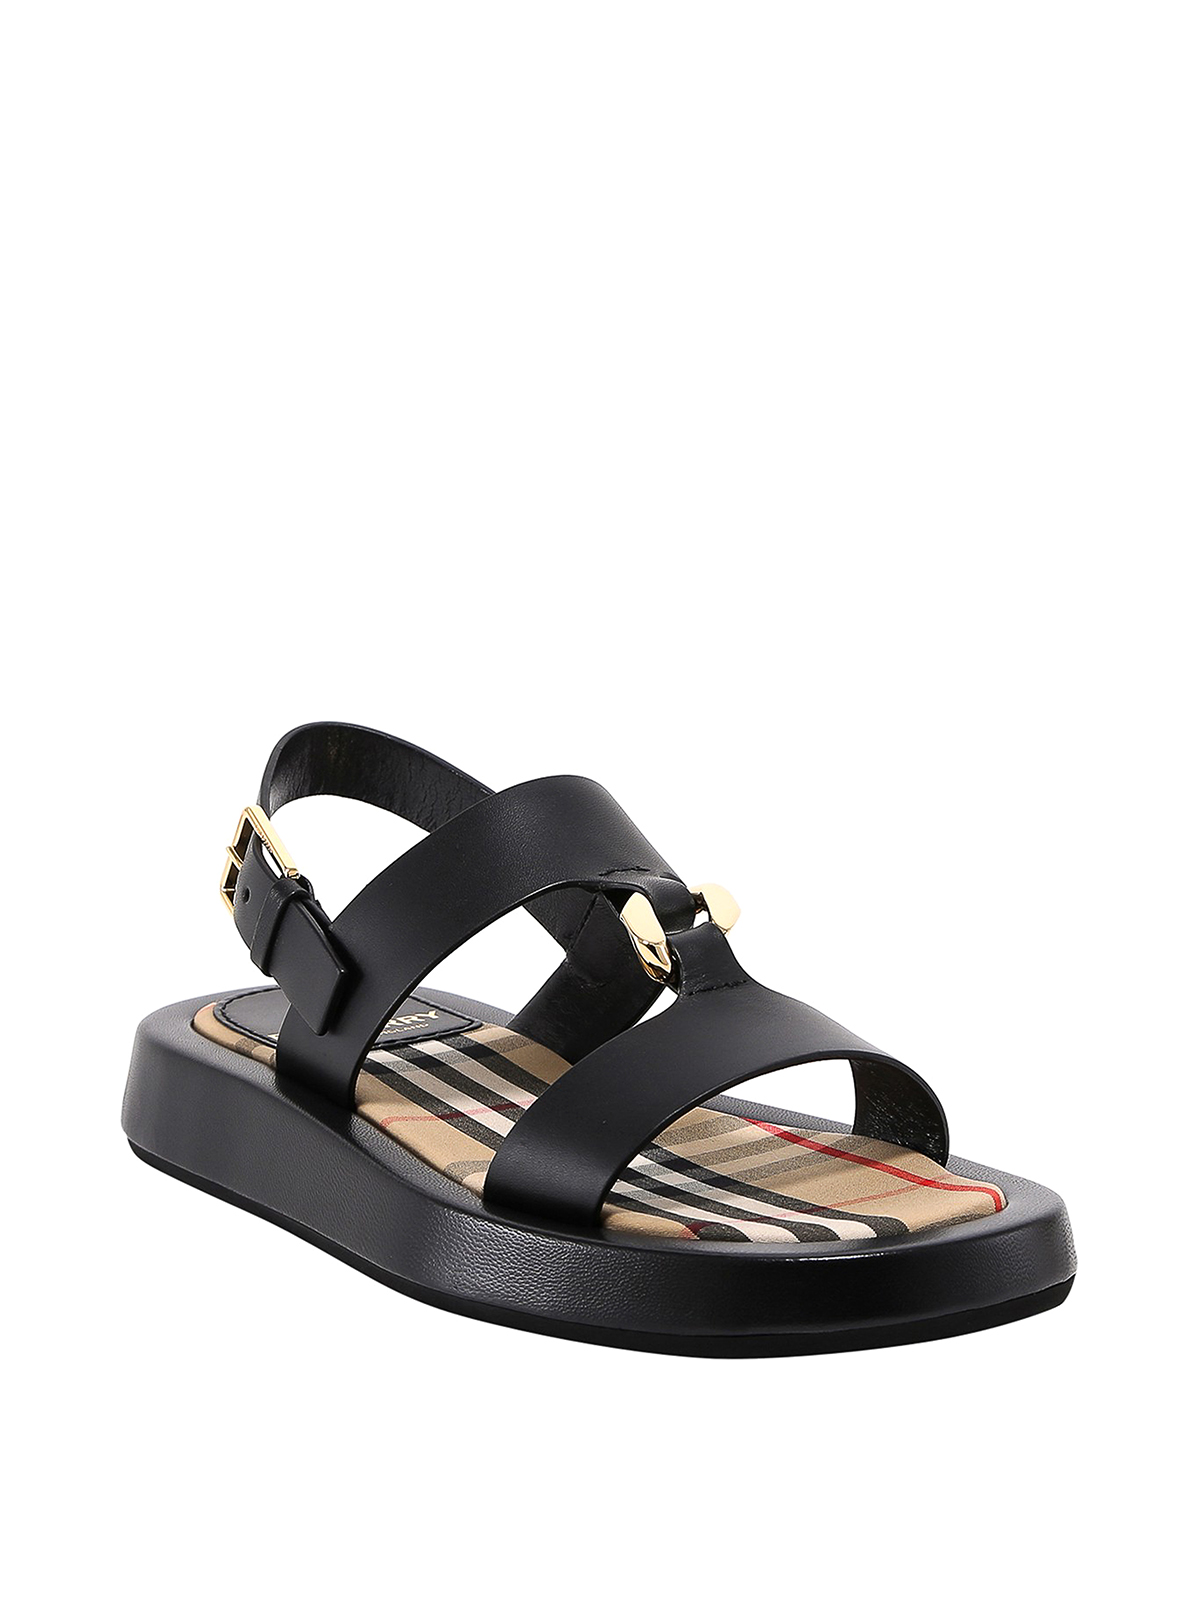 Sandals Burberry - Calfskin sandals with gold ring - 8037453 